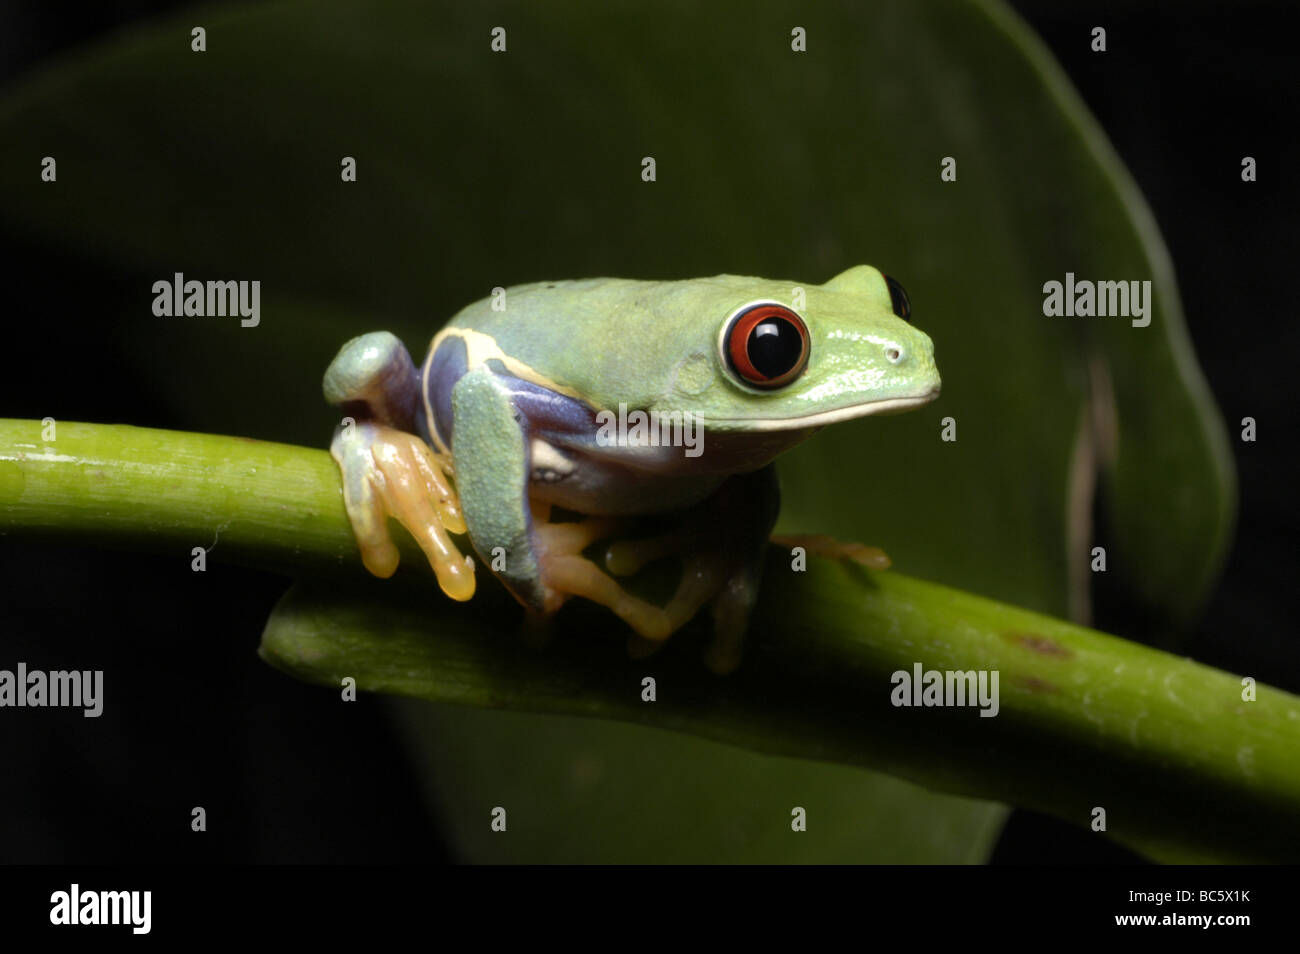 Young Red Eyed Tree Frog, Agalychnis callidrya. Also known as Red Eyed Leaf Frog. Stock Photo